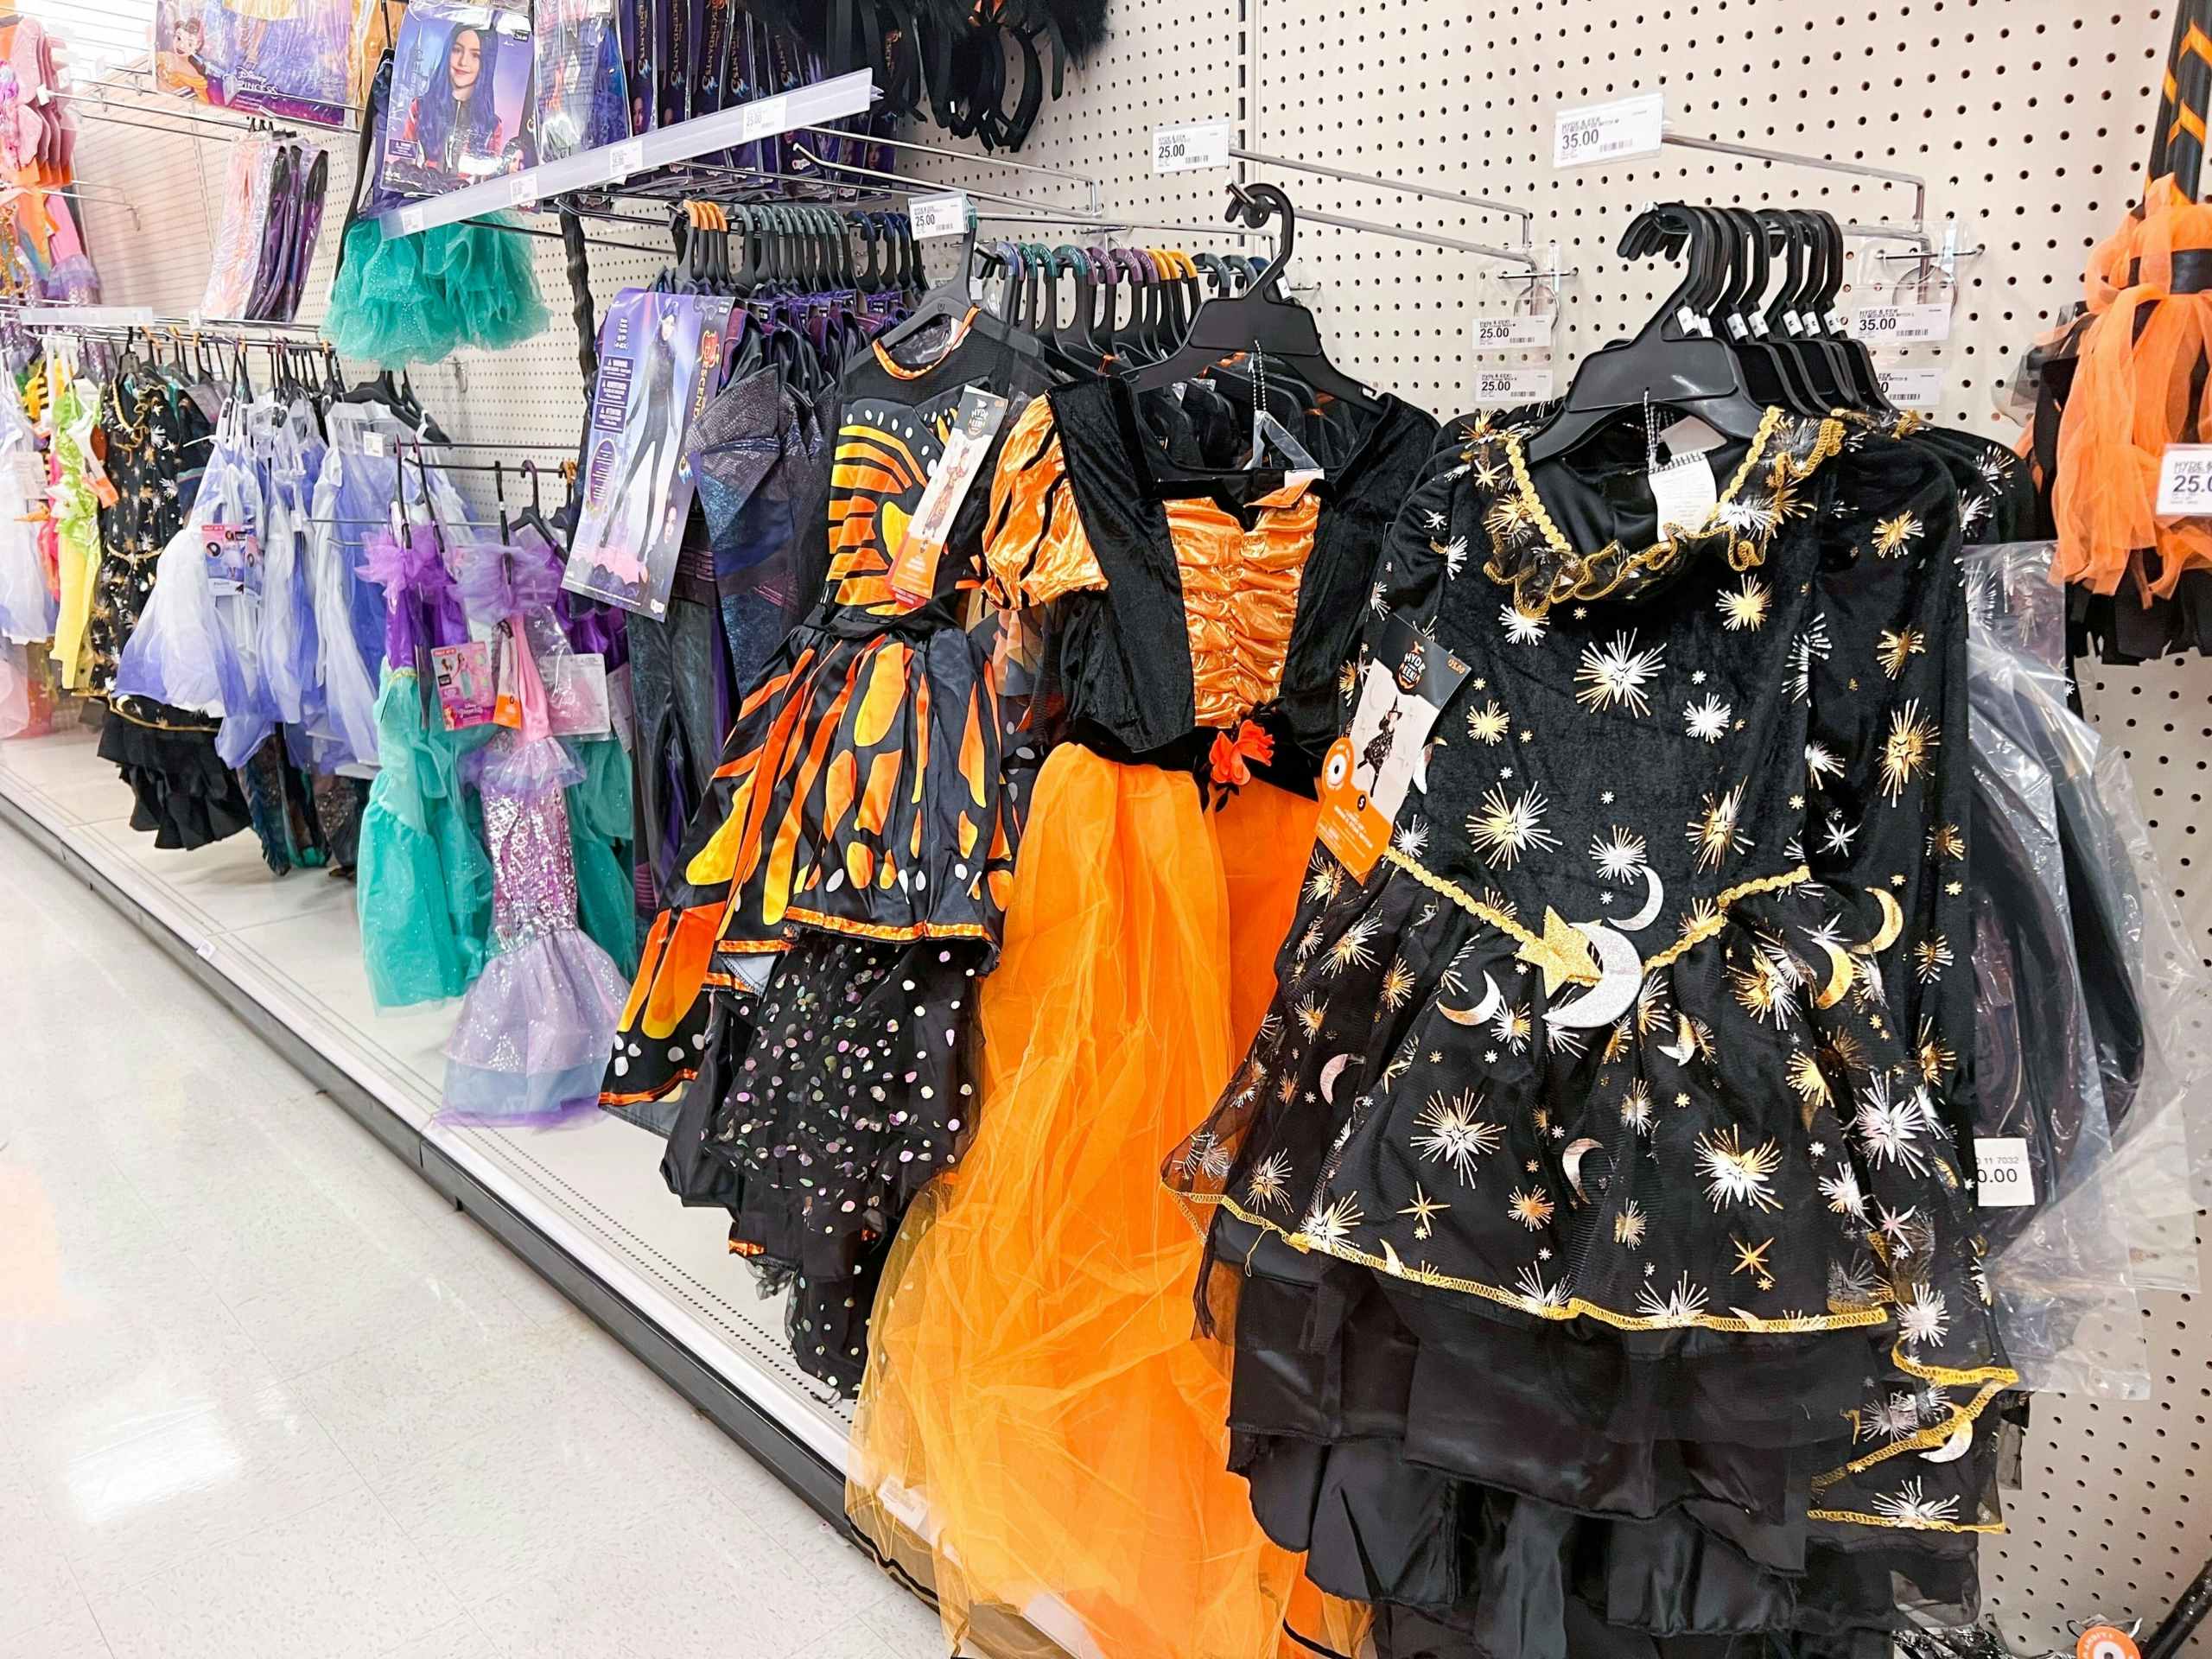 halloween costumes hanging in an aisle